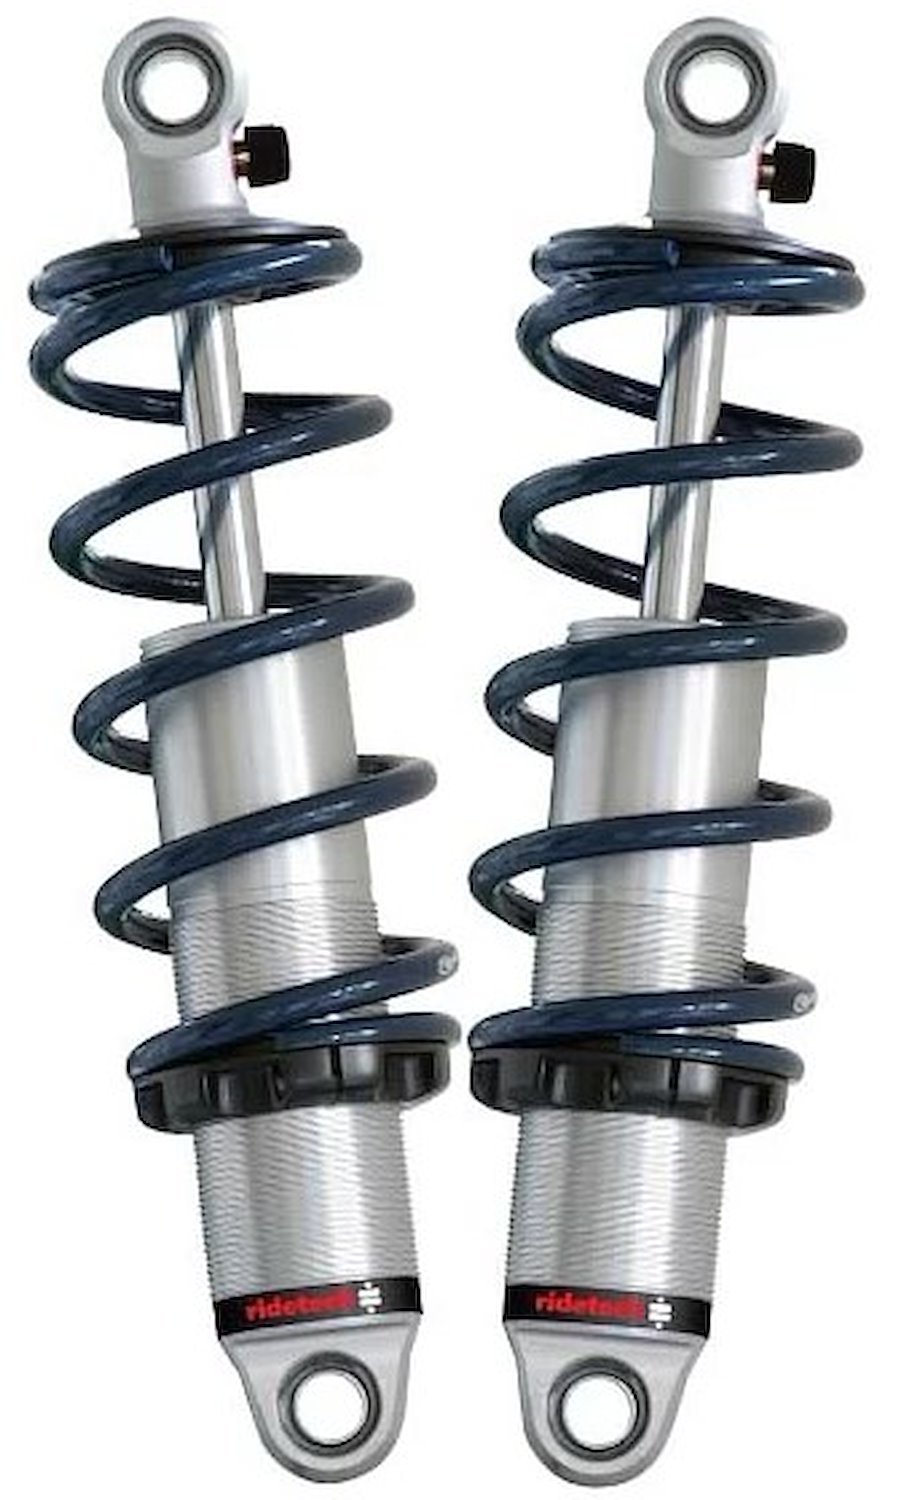 Rear Coil-Overs for 1965-1979 Ford F-100, F-150 Trucks